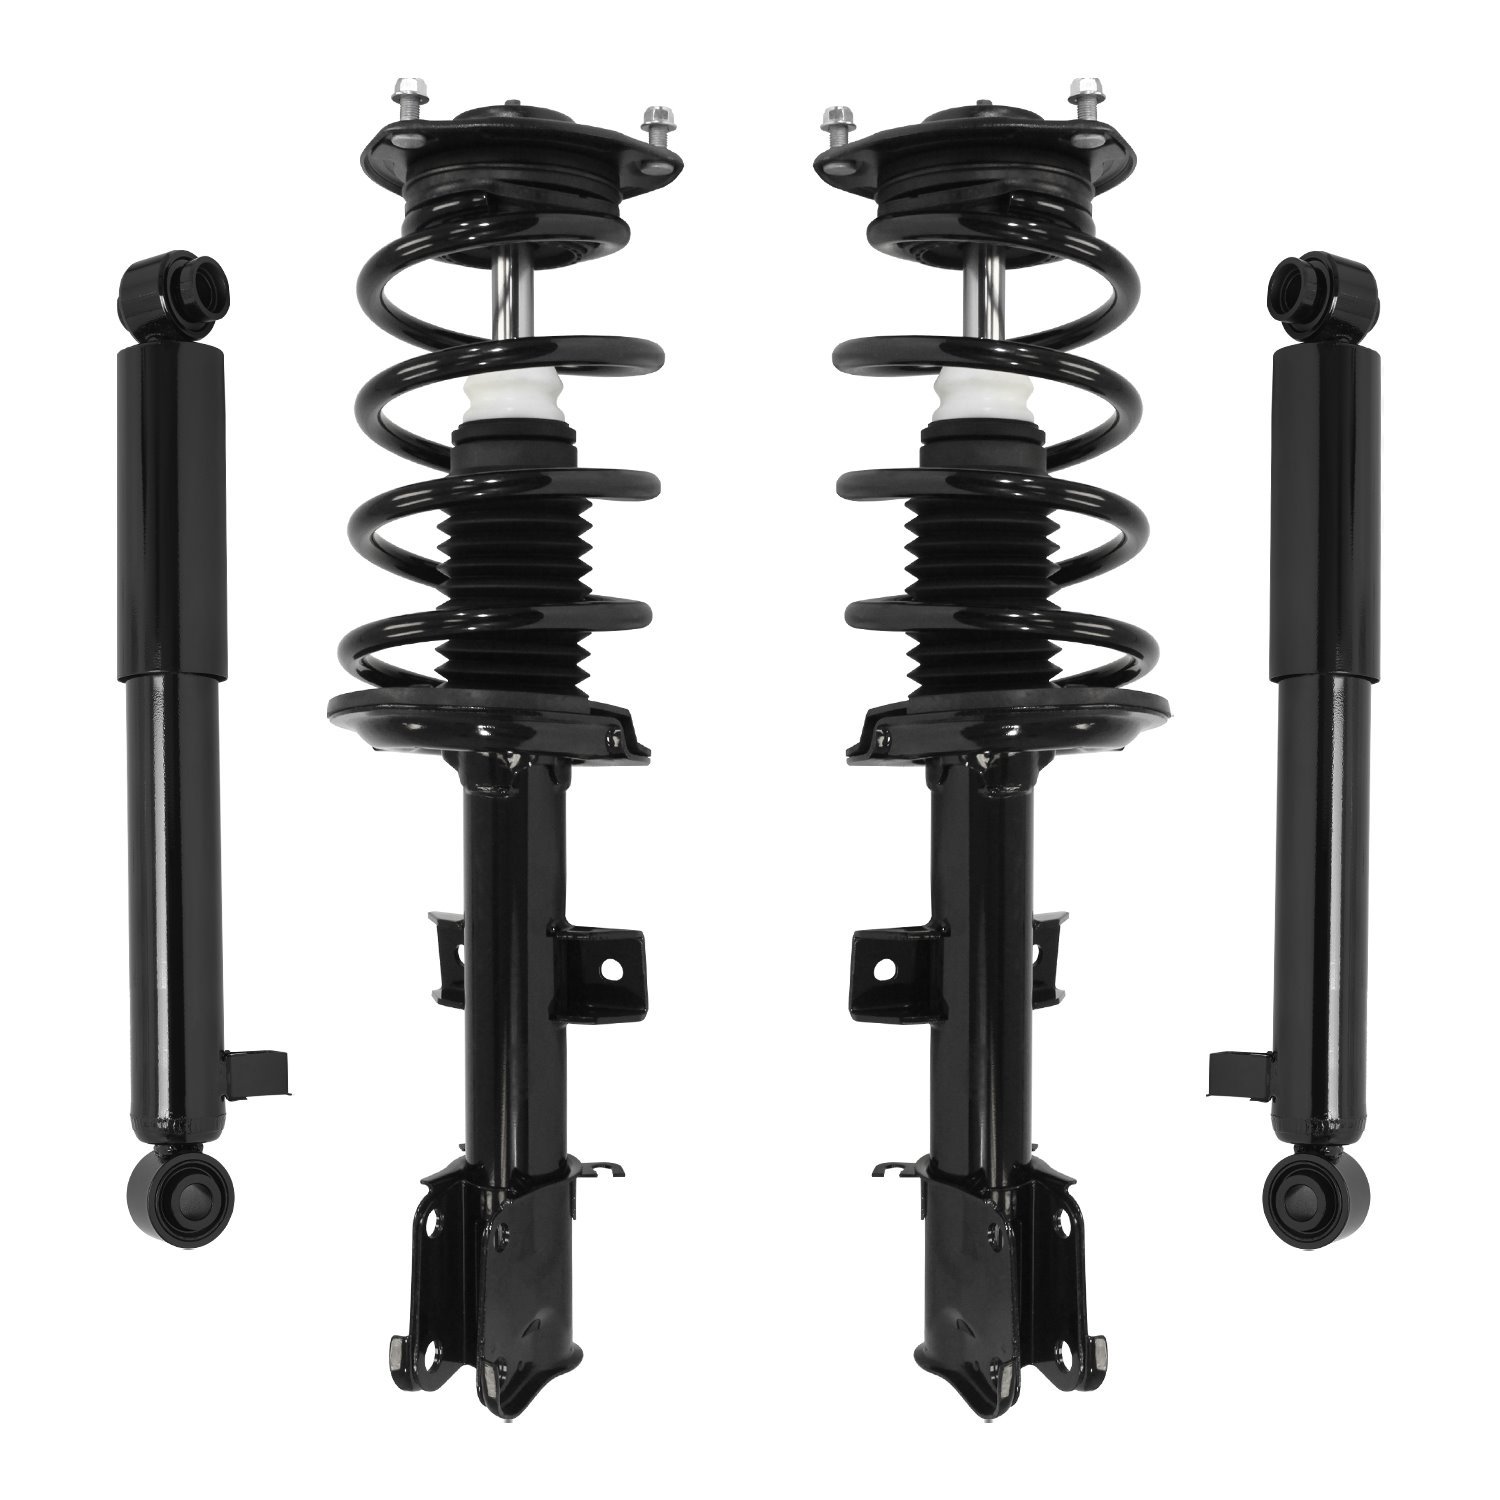 4-11655-259170-001 Front & Rear Suspension Strut & Coil Spring Assembly Fits Select Kia Sorento